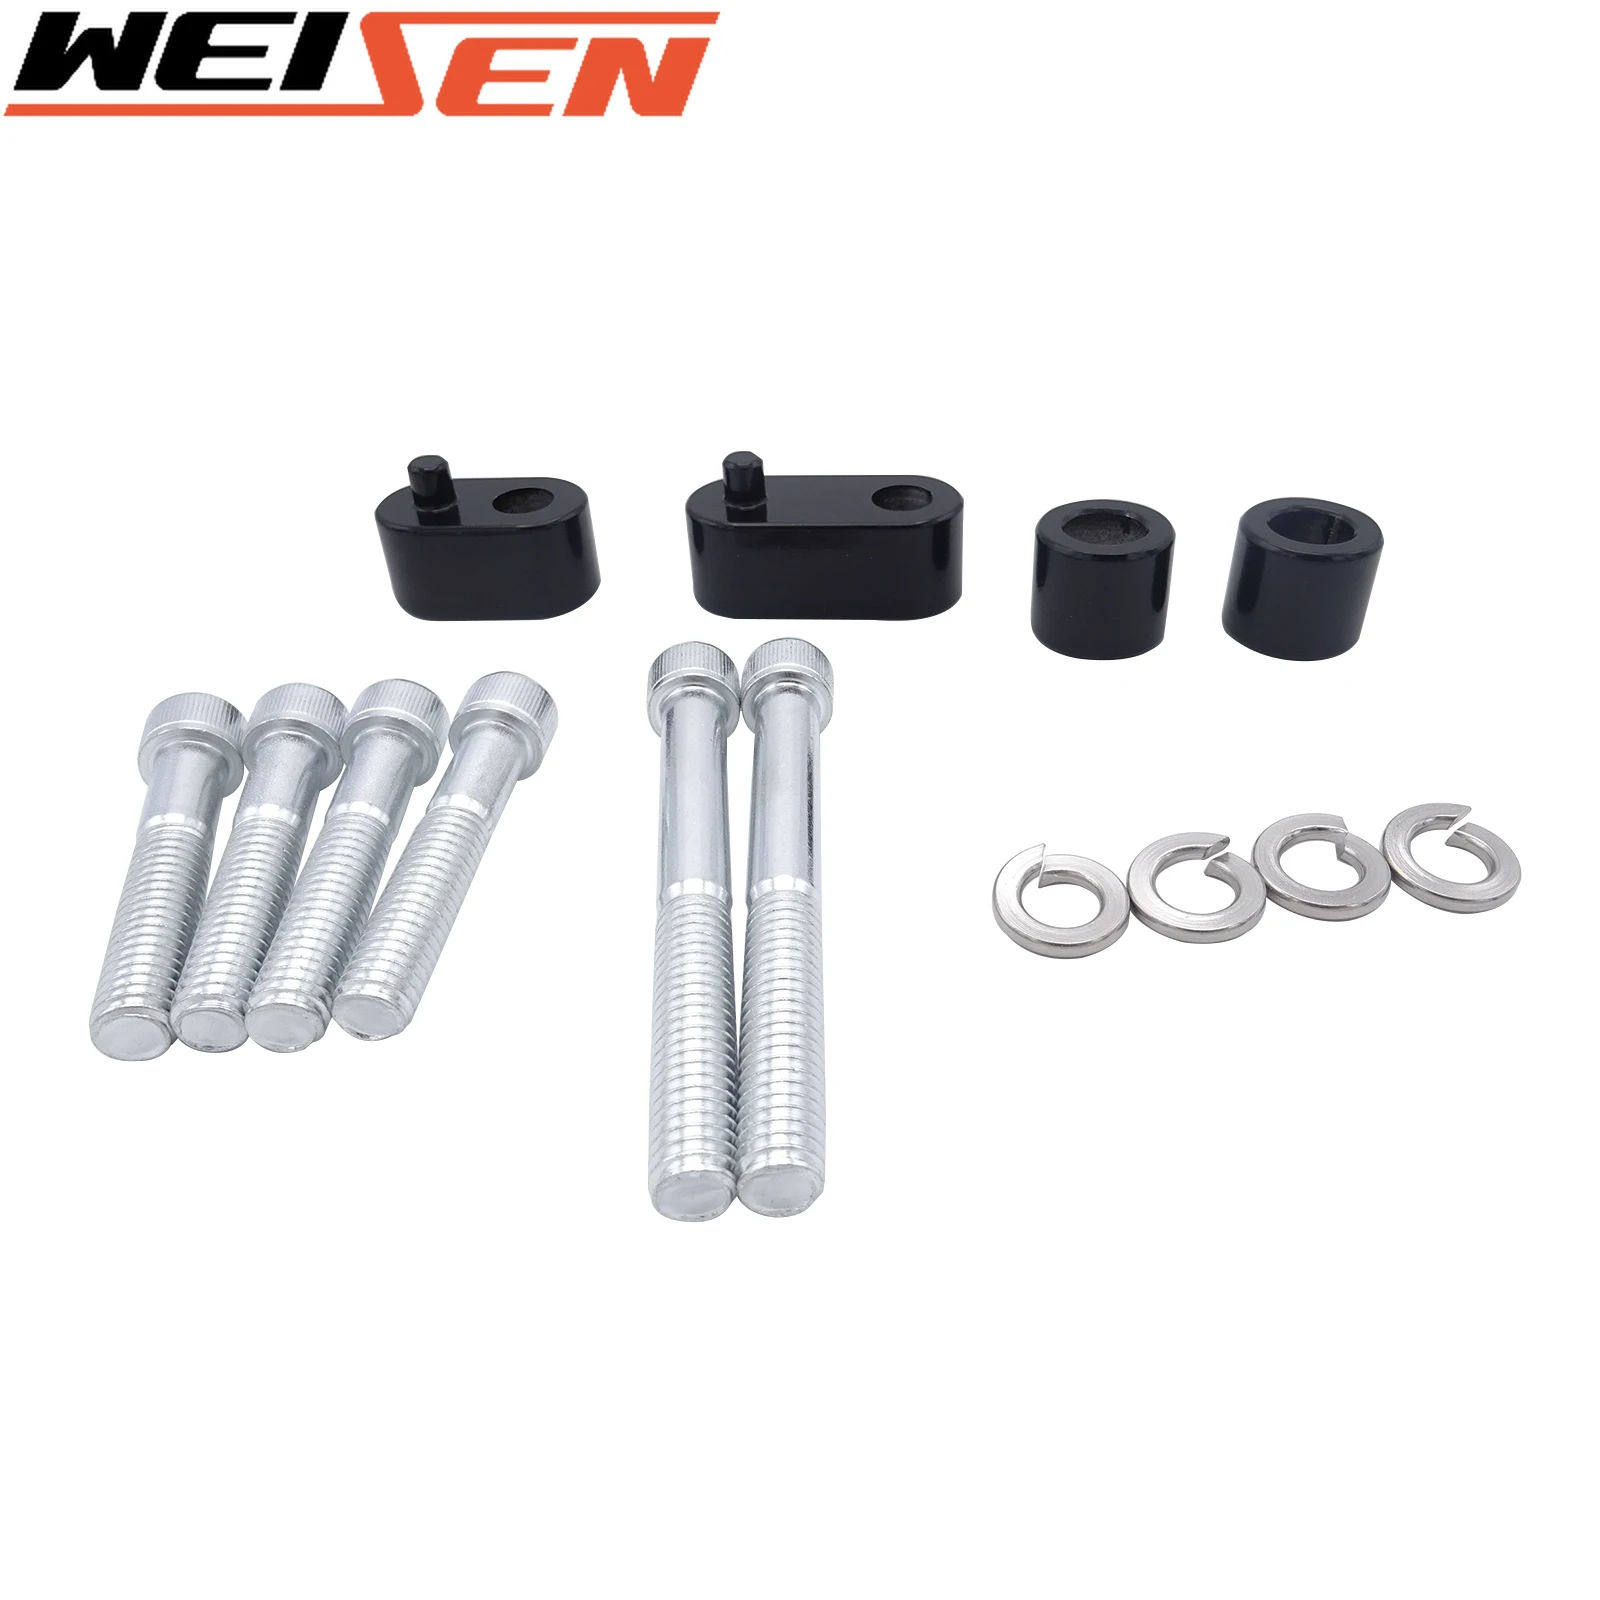 

For Harley 2009-2023 FLHT FLHR FLTR FLHX And 2009-2013 FL Trikes Motorcycle 3/4 Inches Footpeg Extension Kit With Bolts